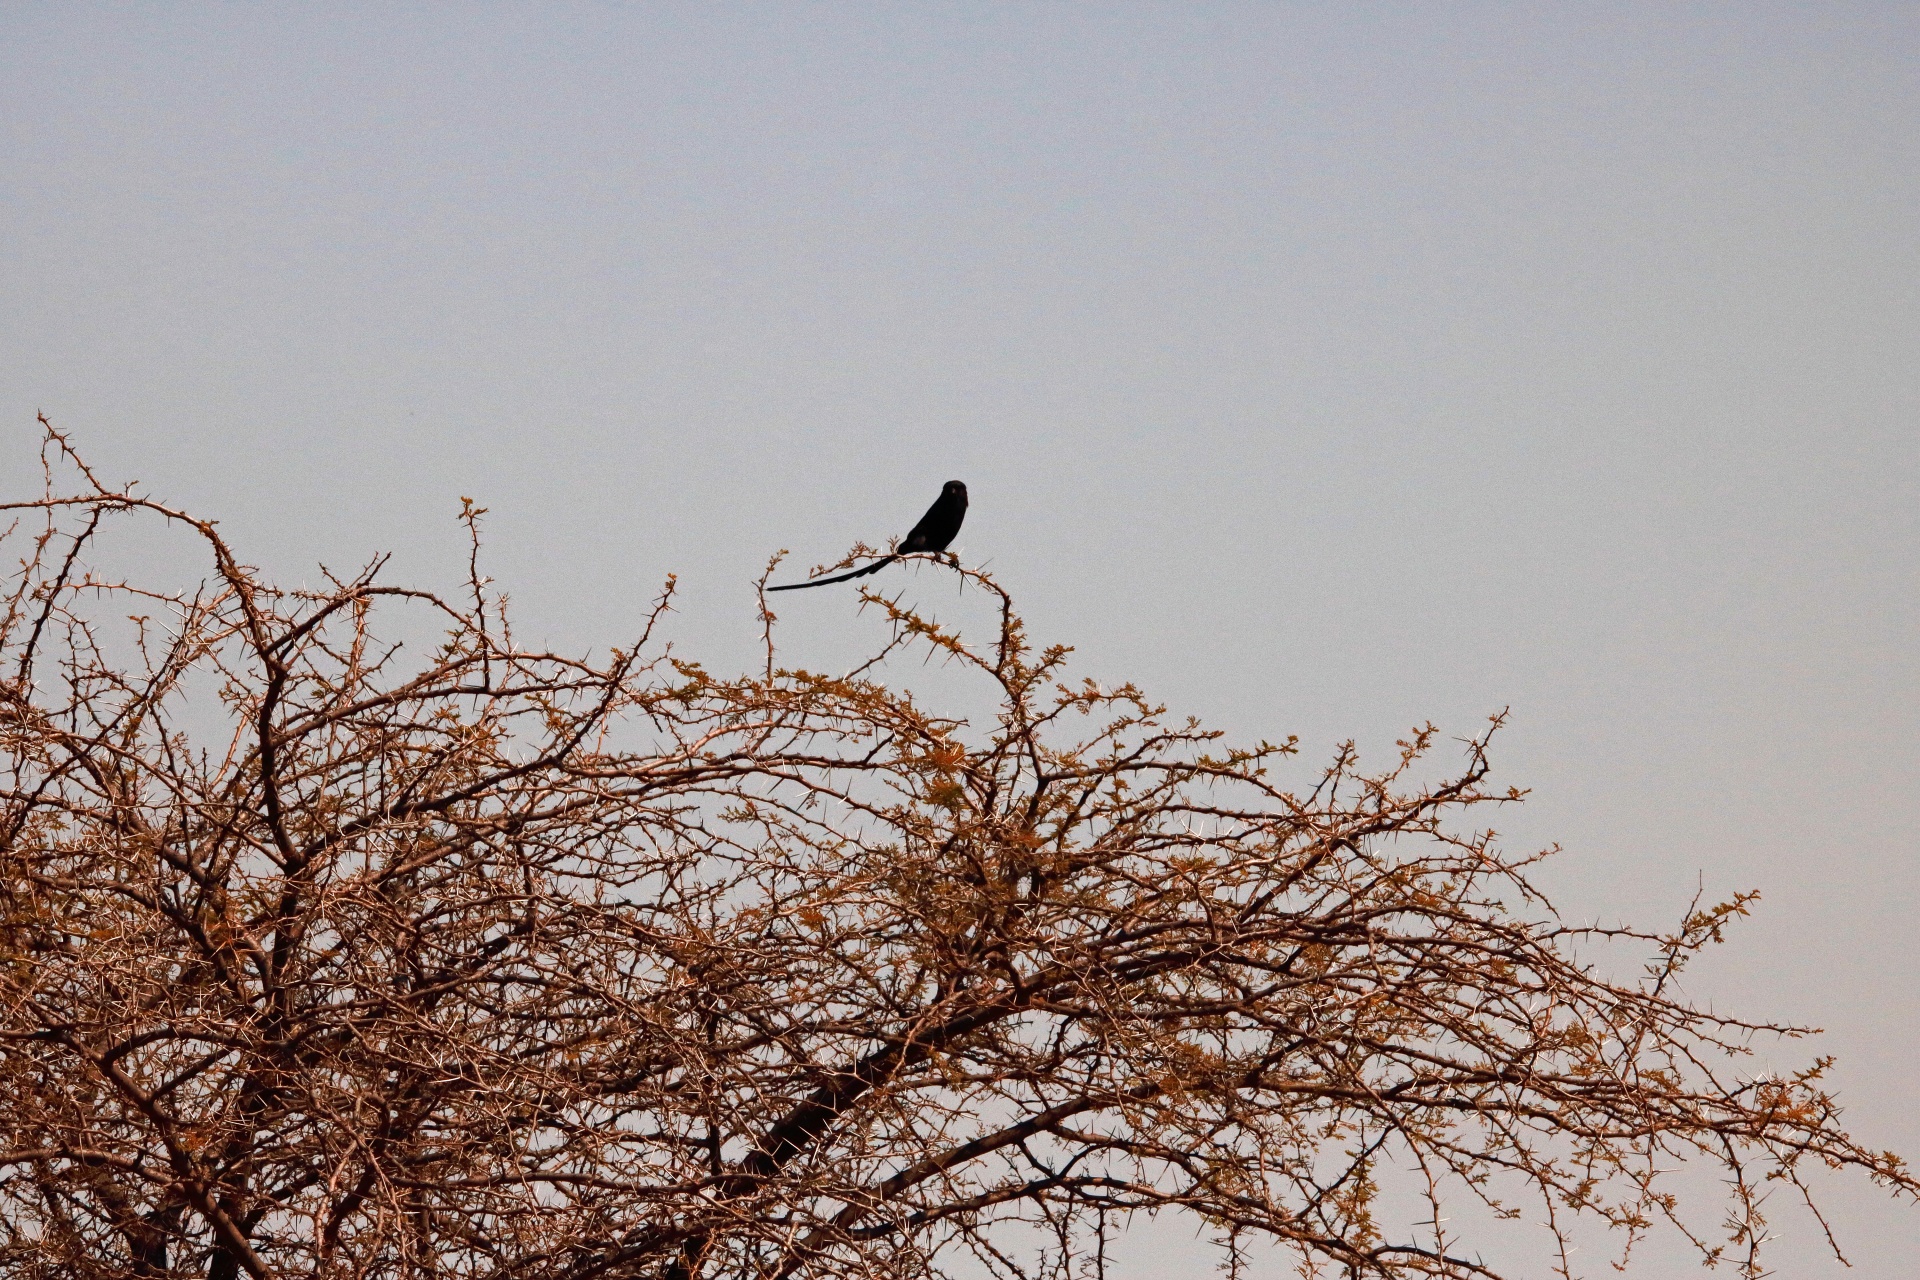 Black Bird With A Long Tail